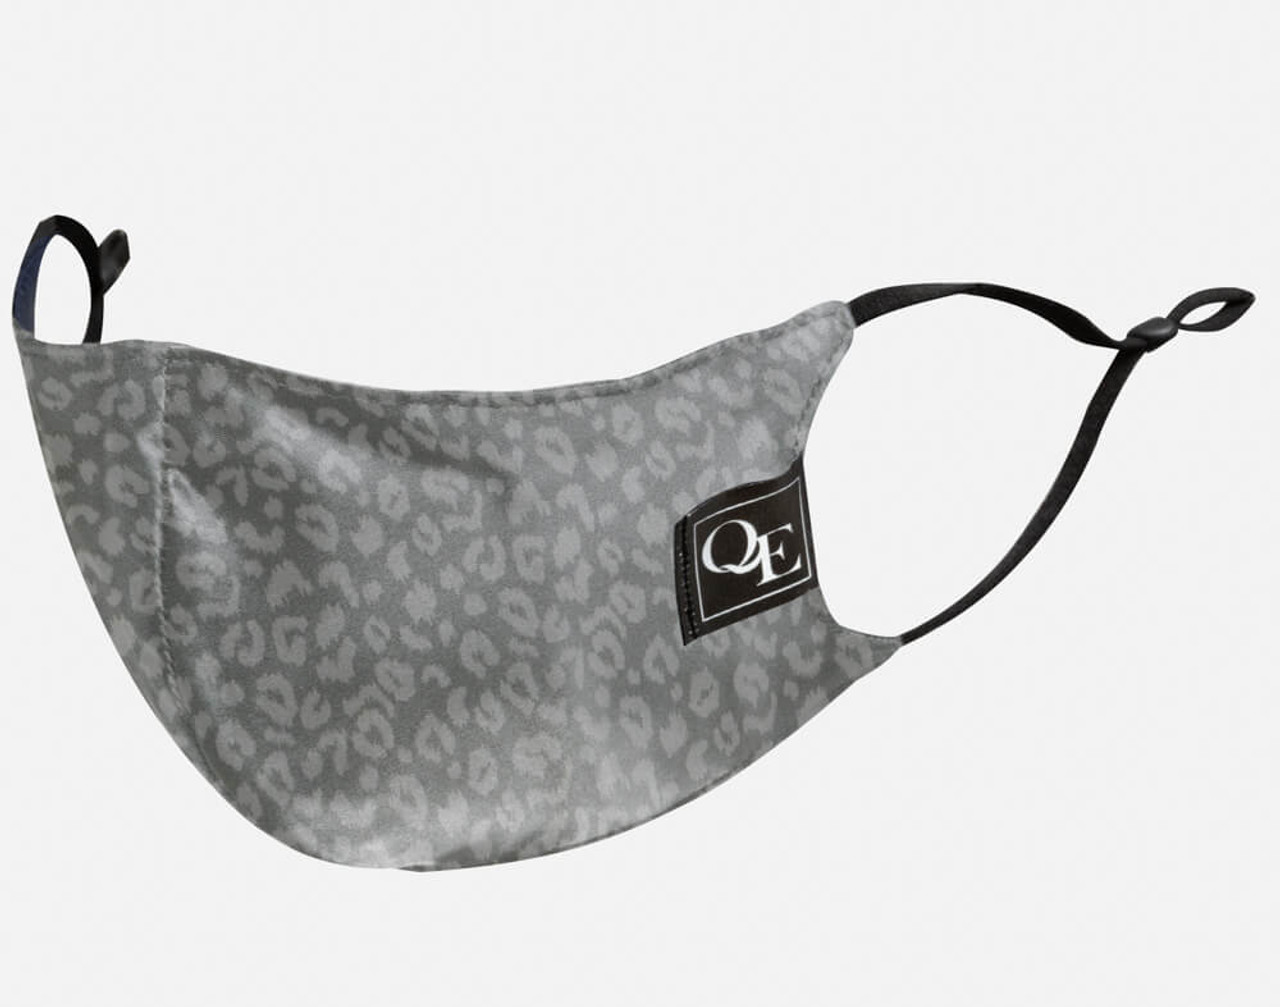 Silver Leopard Silk Face Mask features adjustable straps for a snug fit.